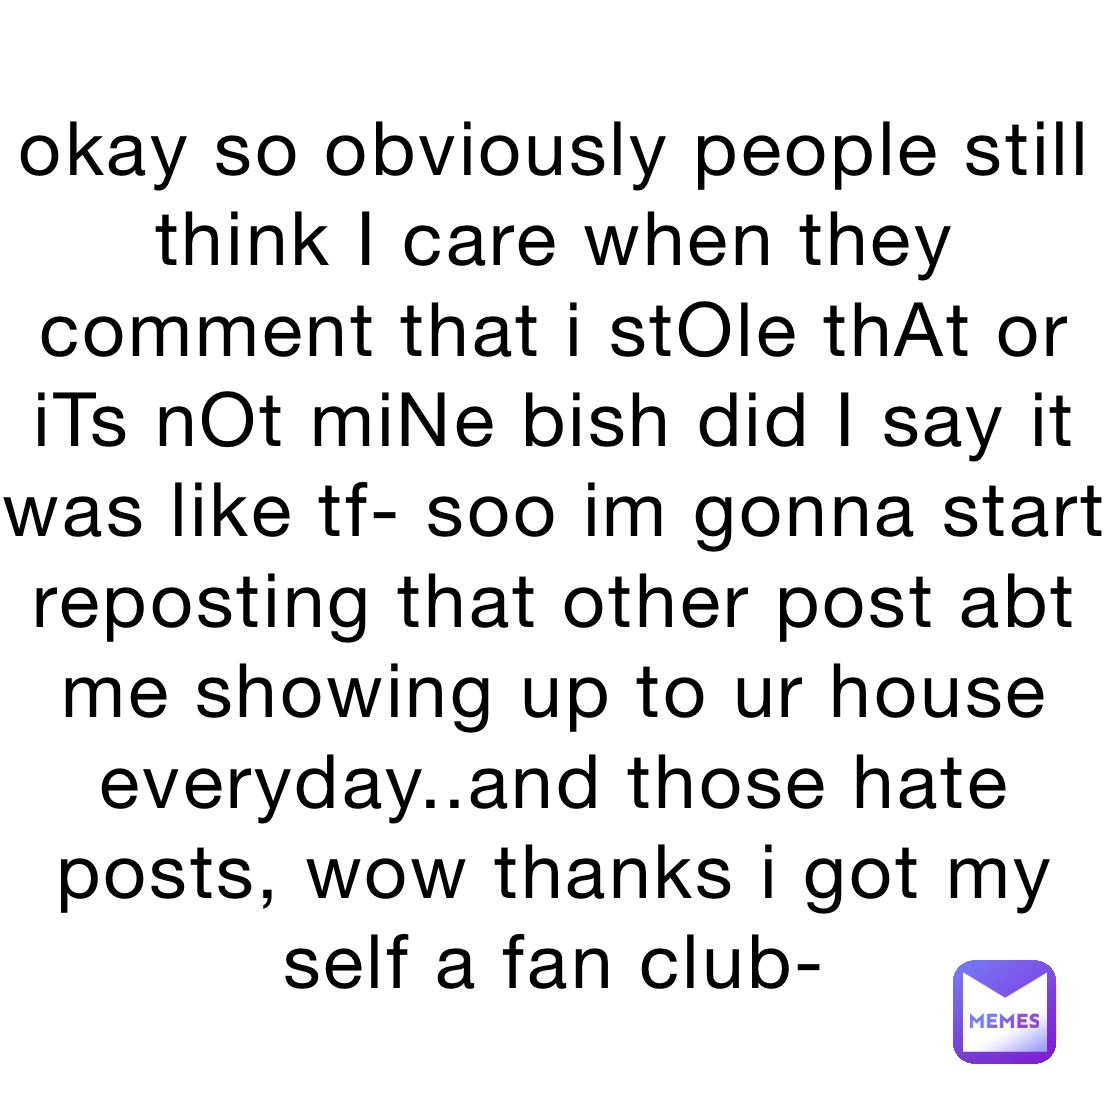 okay so obviously people still think I care when they comment that i stOle thAt or iTs nOt miNe bish did I say it was like tf- soo im gonna start reposting that other post abt me showing up to ur house everyday..and those hate posts, wow thanks i got my self a fan club-